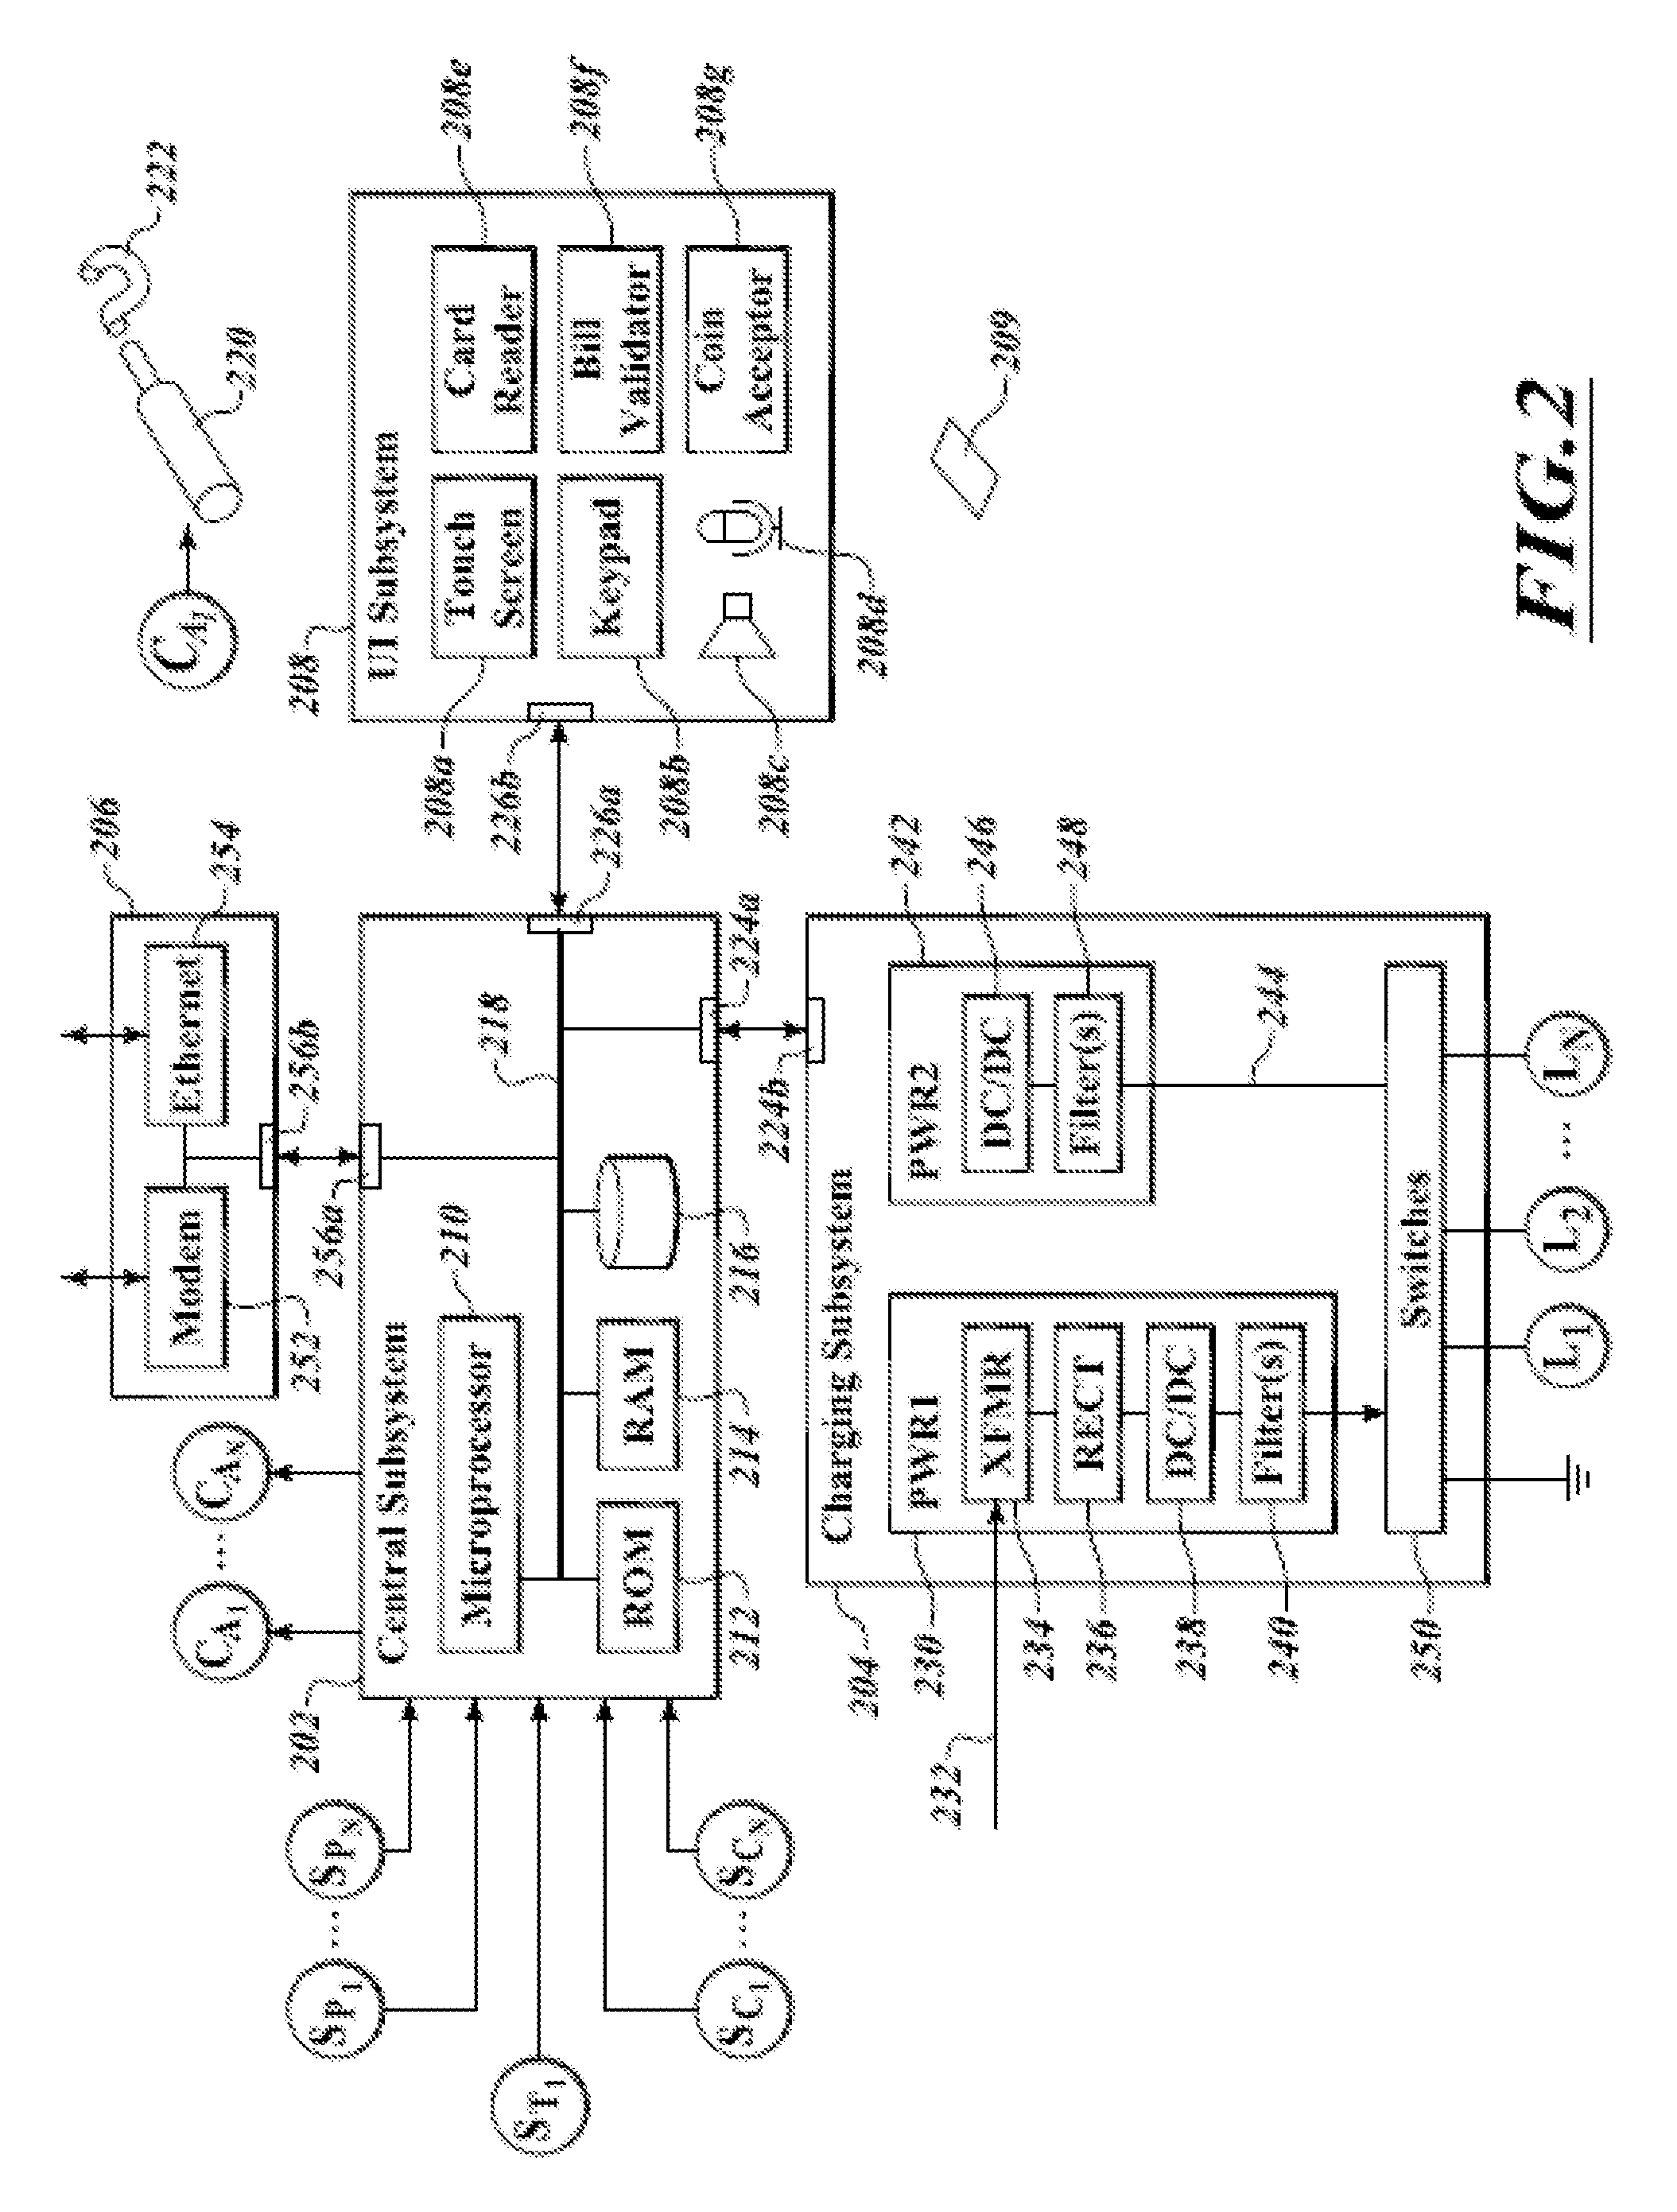 Apparatus, method and article for authentication, security and control of power storage devices, such as batteries, based on user profiles